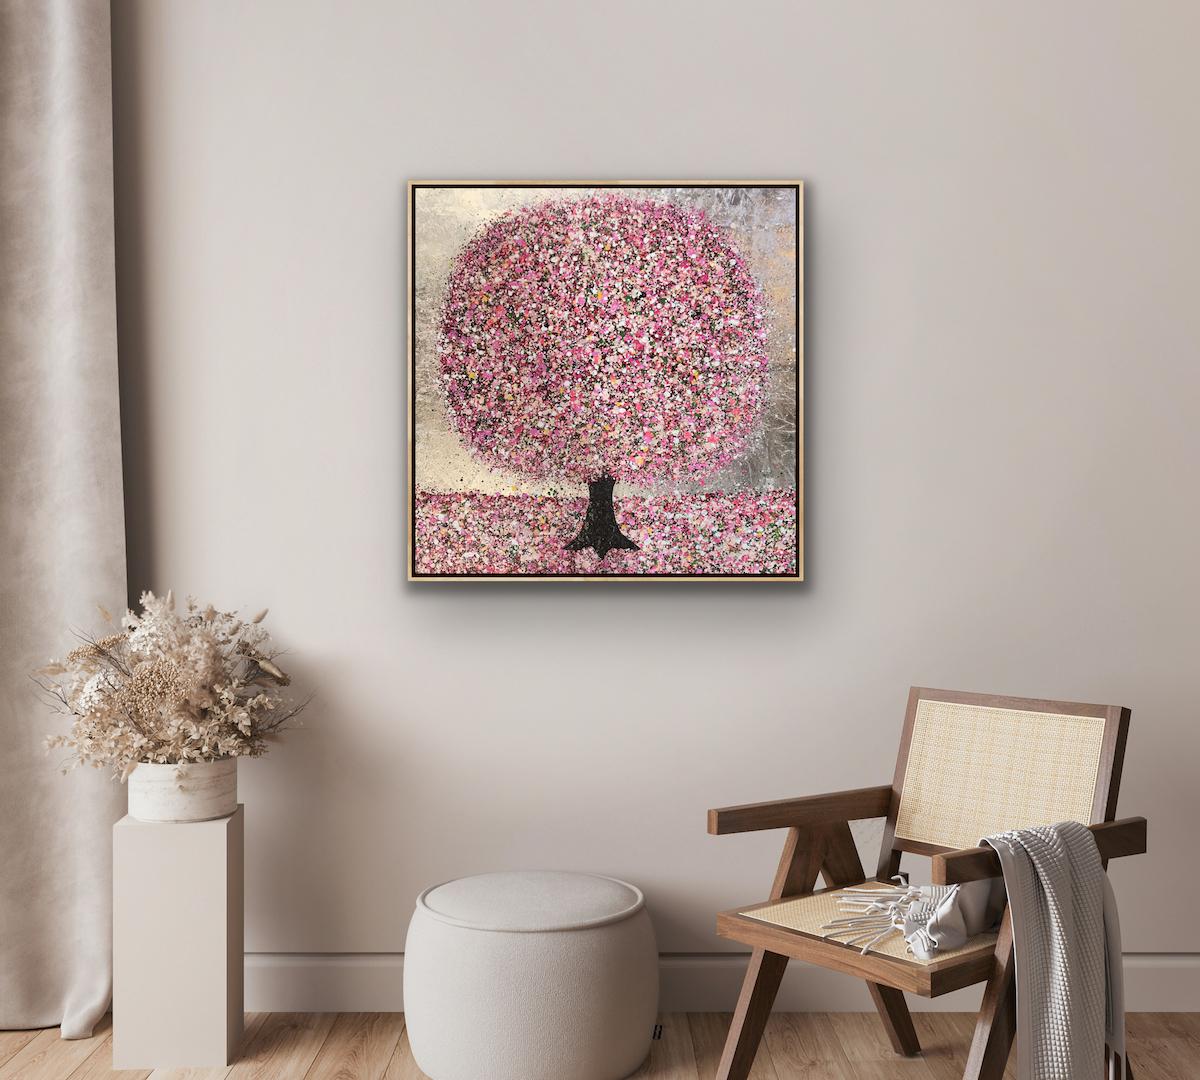 Happy Blossom and a Silver Sky Acrylic on Canvas Painting by Nicky Chubb, 2020 For Sale 4